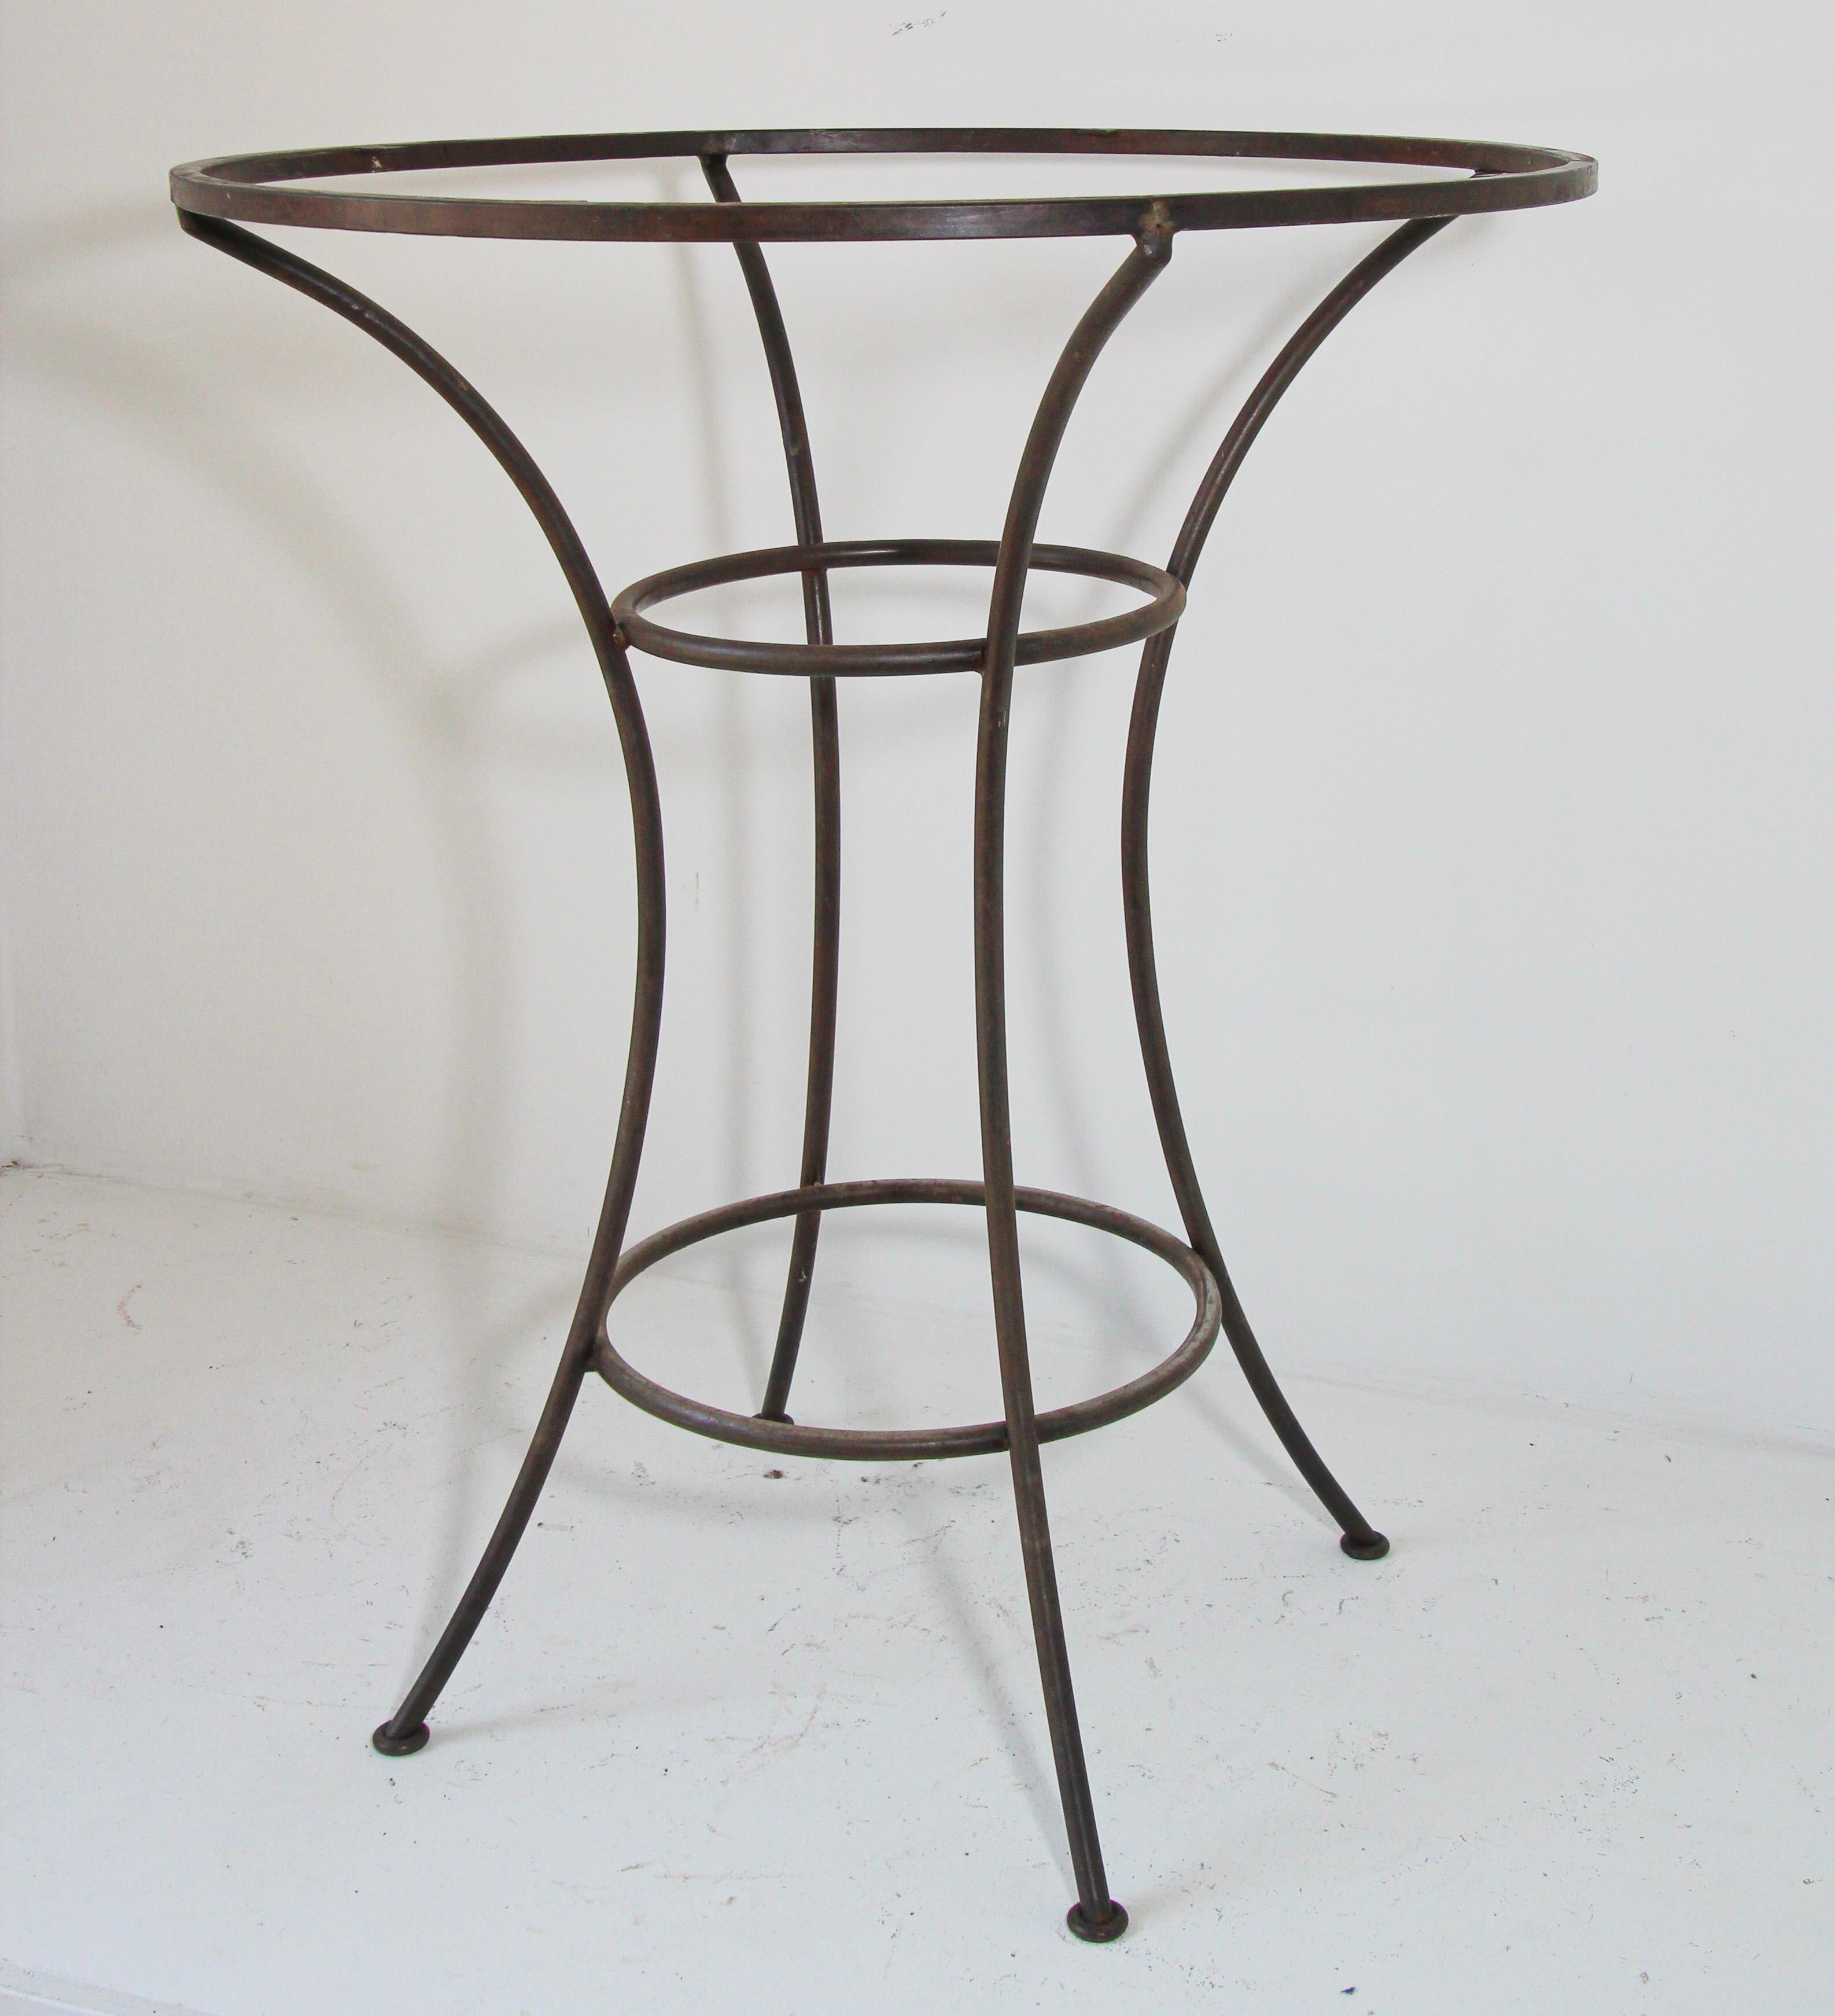 Handcrafted custom bar height table with wrought iron forged base.
Spanish Revival bar table with simple four curved legs. 
Dimensions:
Iron forged table base: Diameter 36 x Height 42